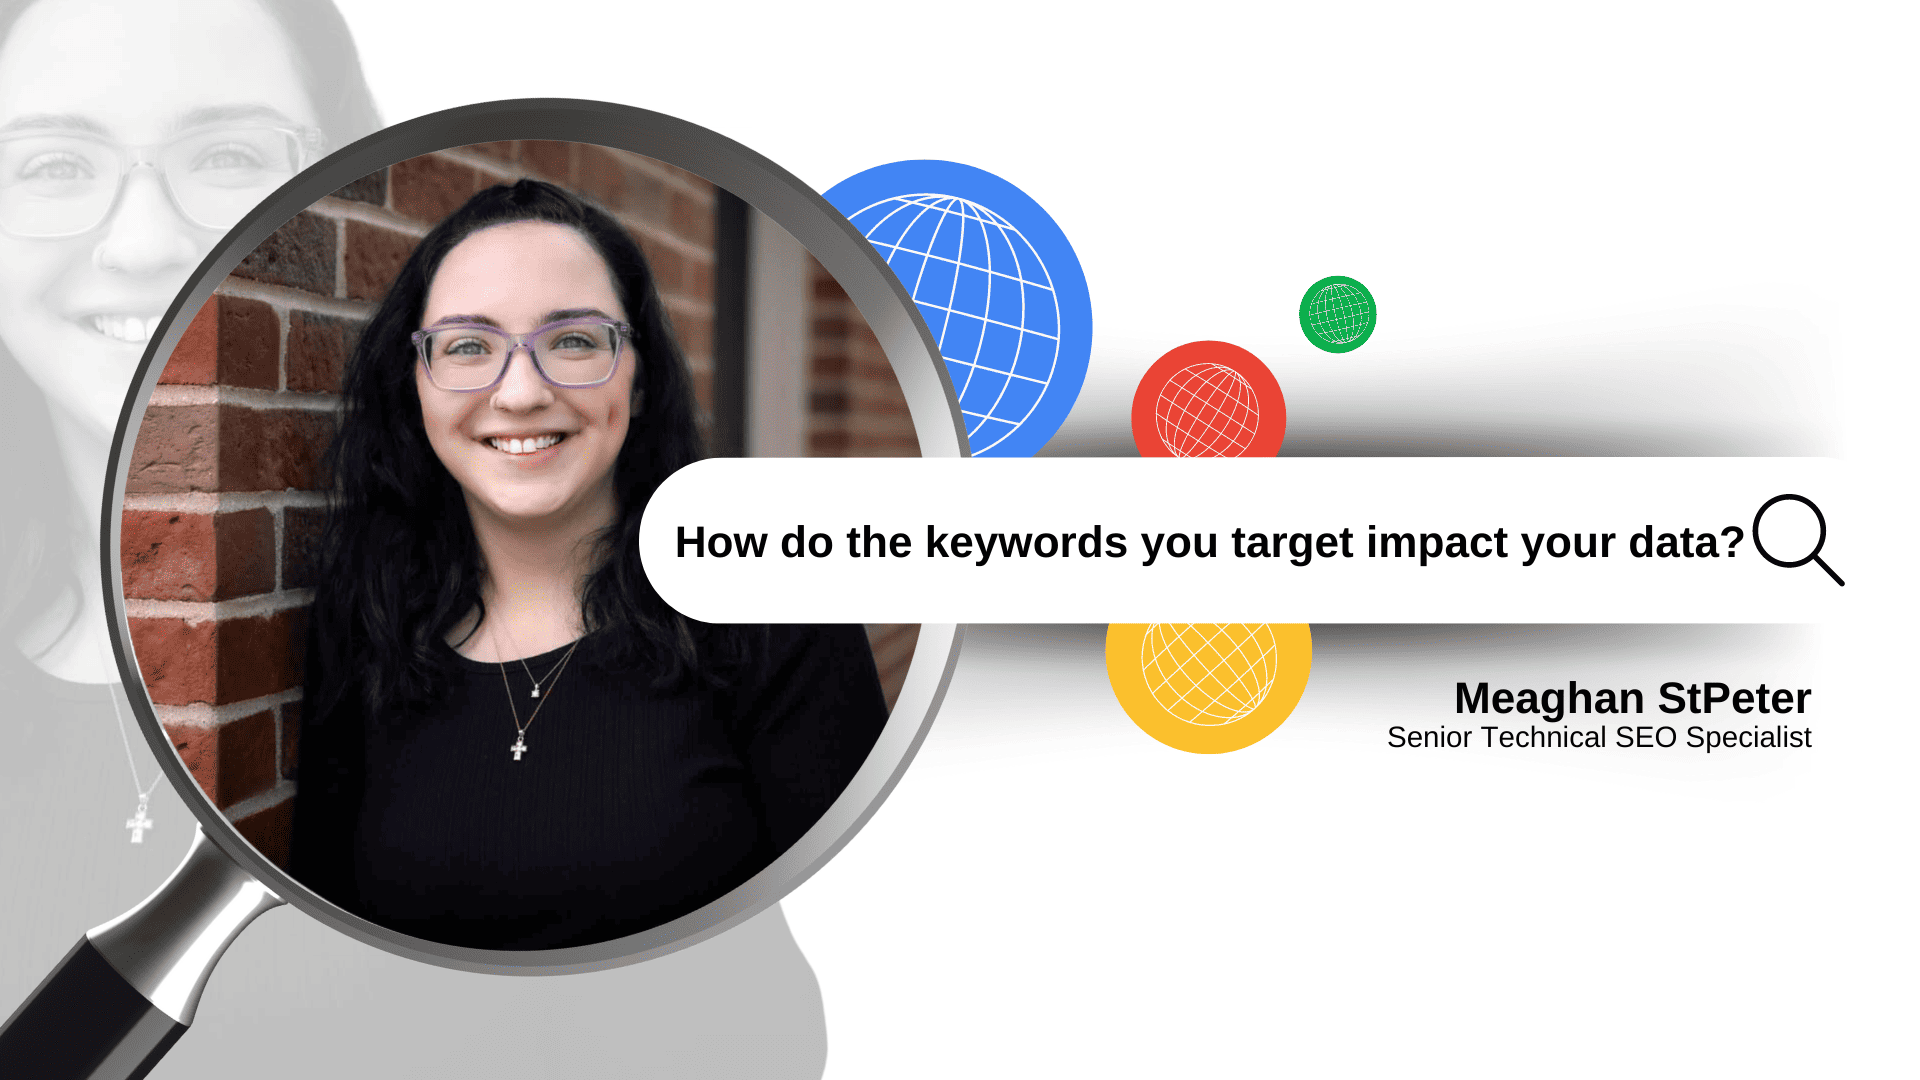 How the Keywords You Target Can Impact Your Data